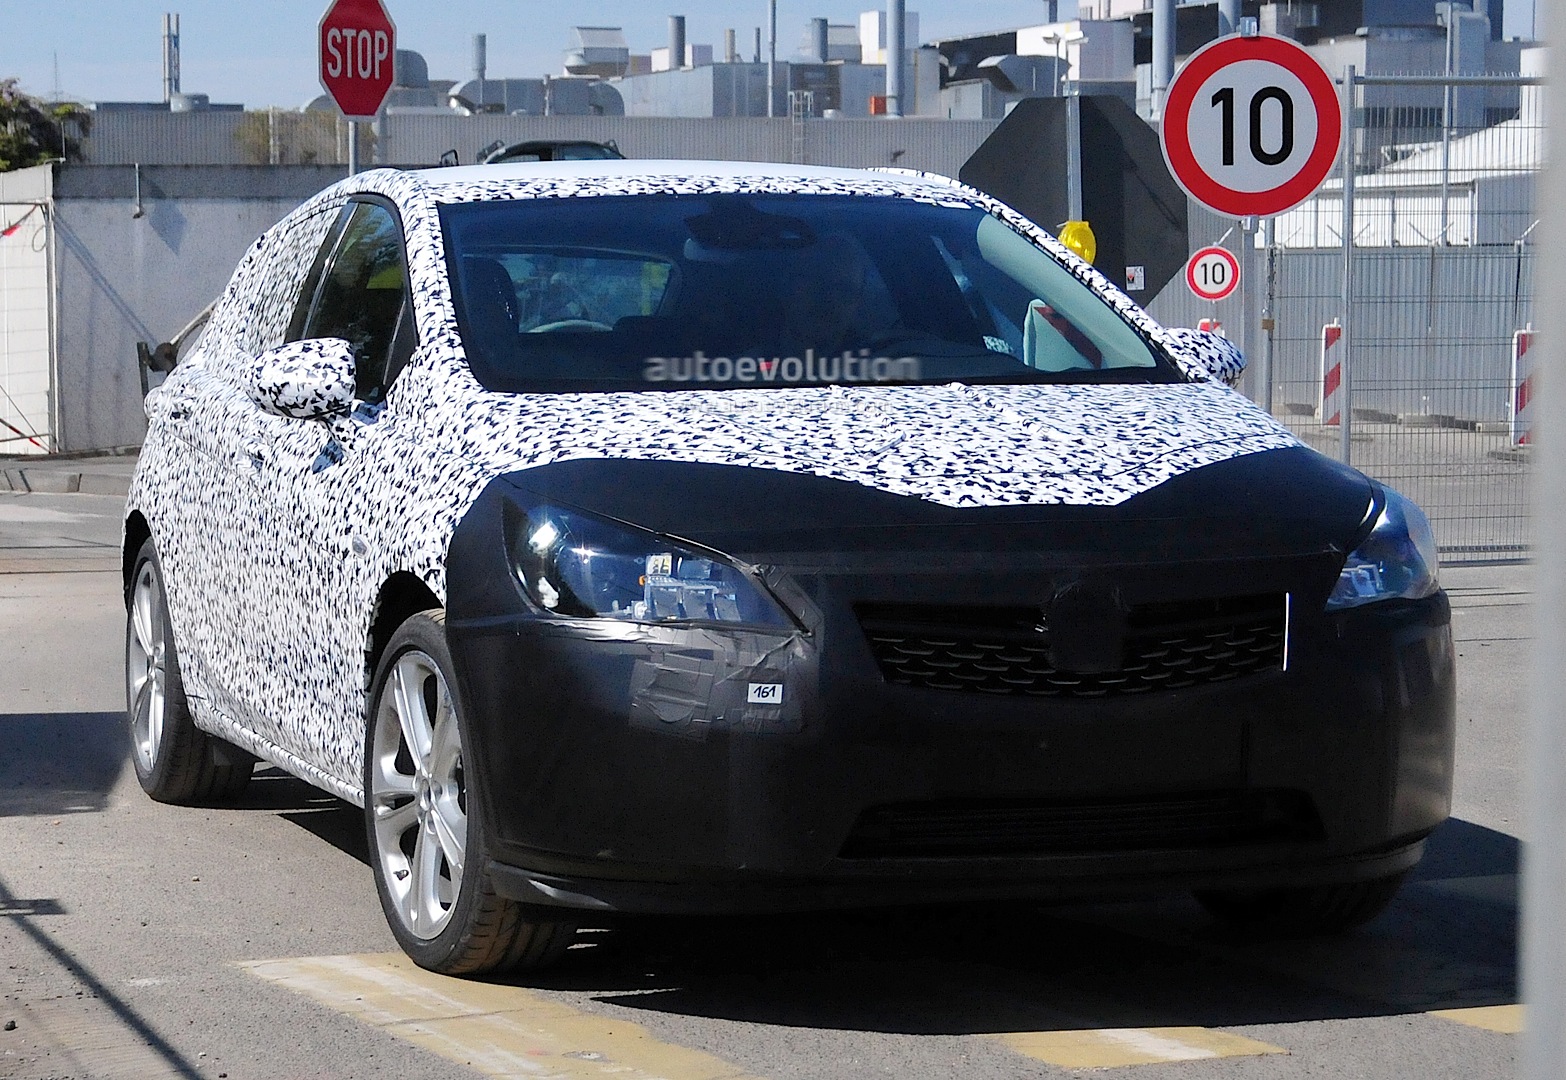 [2015] Opel ASTRA K New-opel-astra-k-7th-generation-spied-in-detail-photo-gallery_9